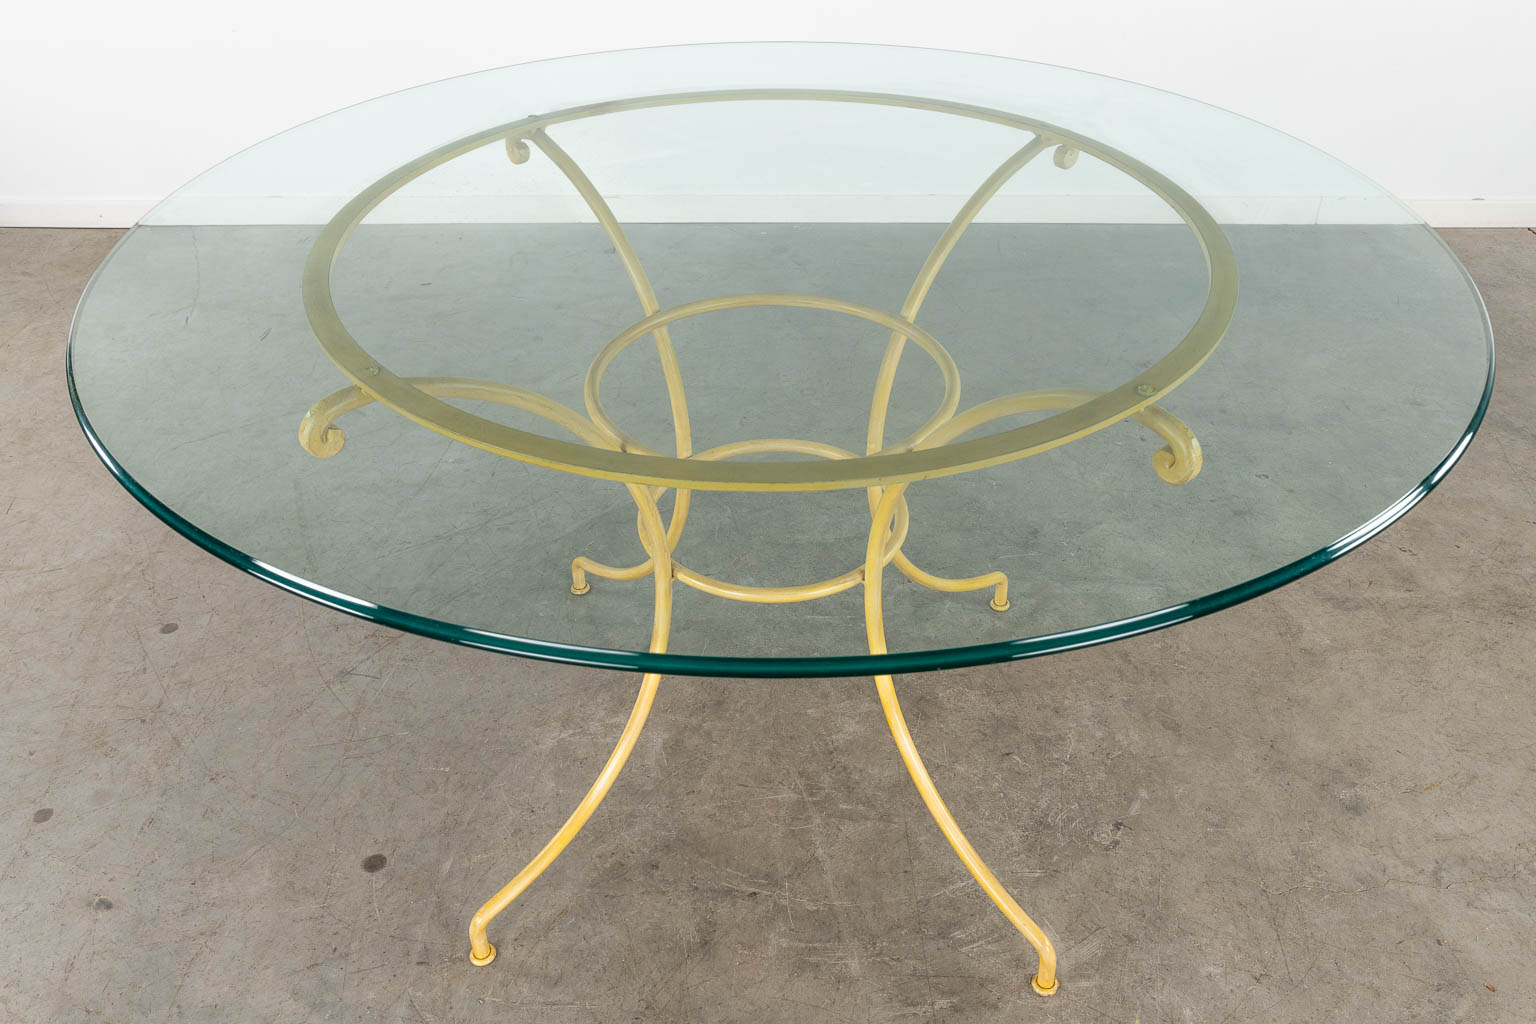 A round table with 6 matching chairs, painted metal. 20th C. (H:77 x D:130 cm)